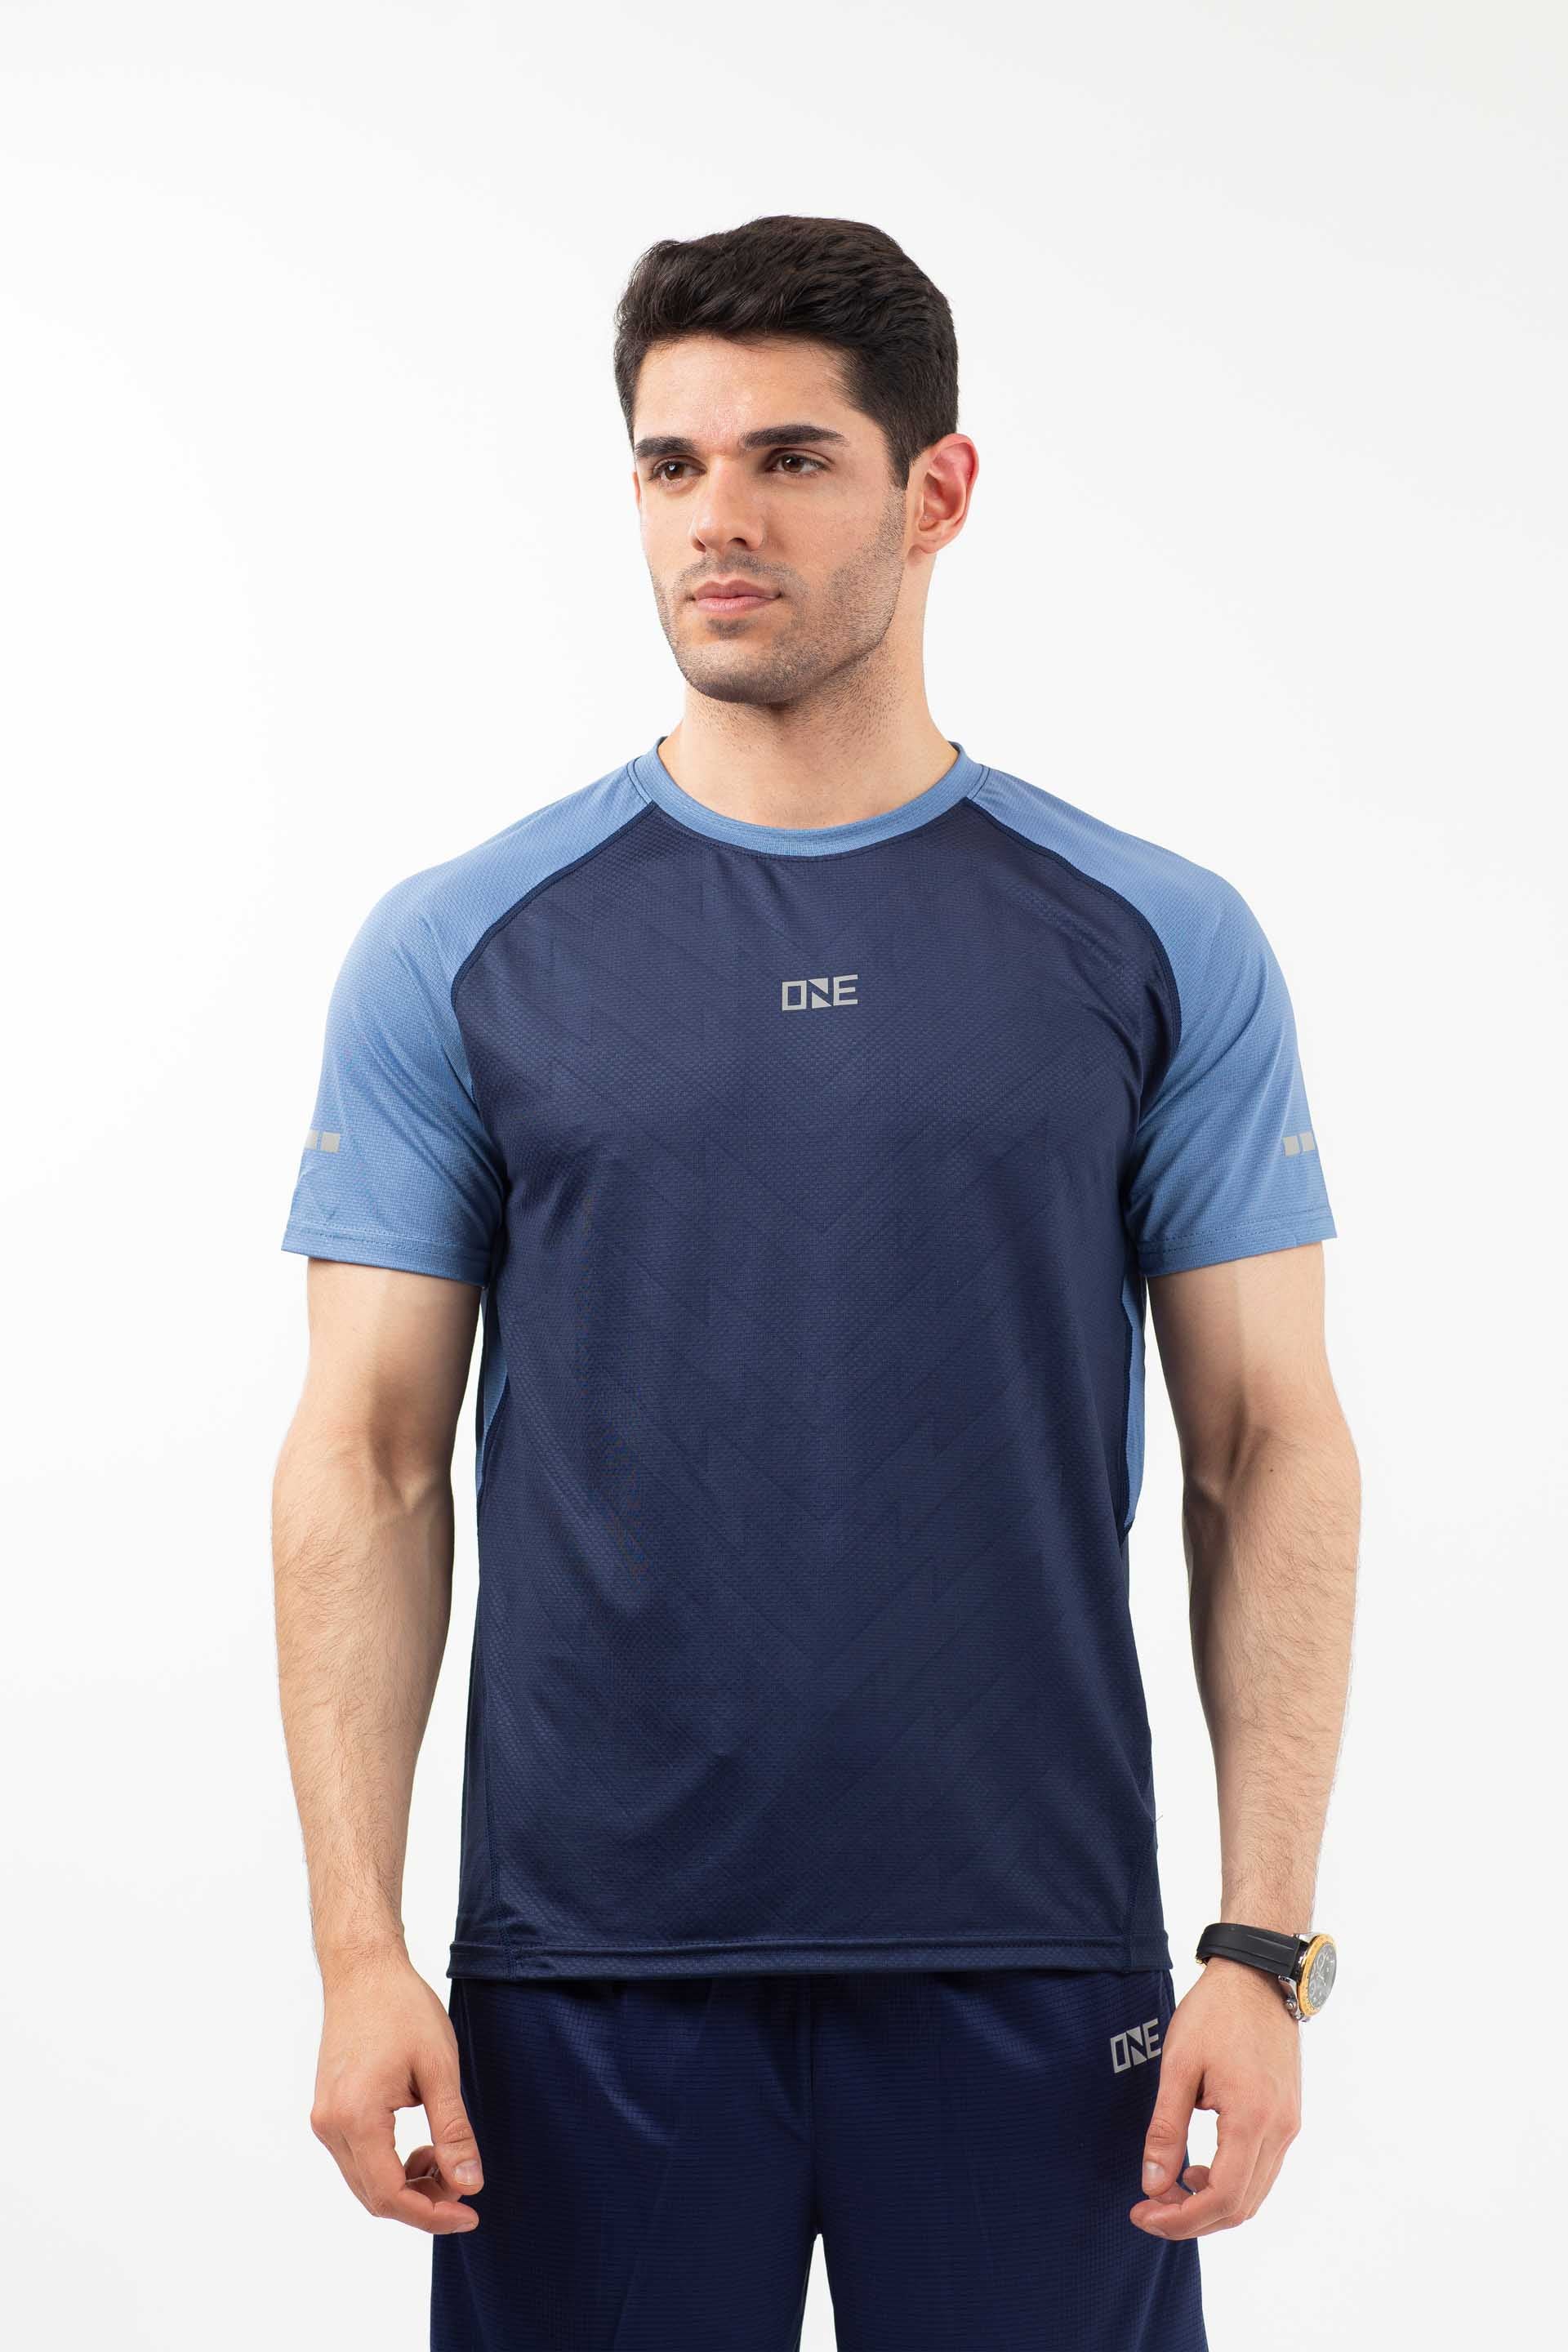 Gym clothes for men online in 2024 | Do checkout gym apparel for men – ONE